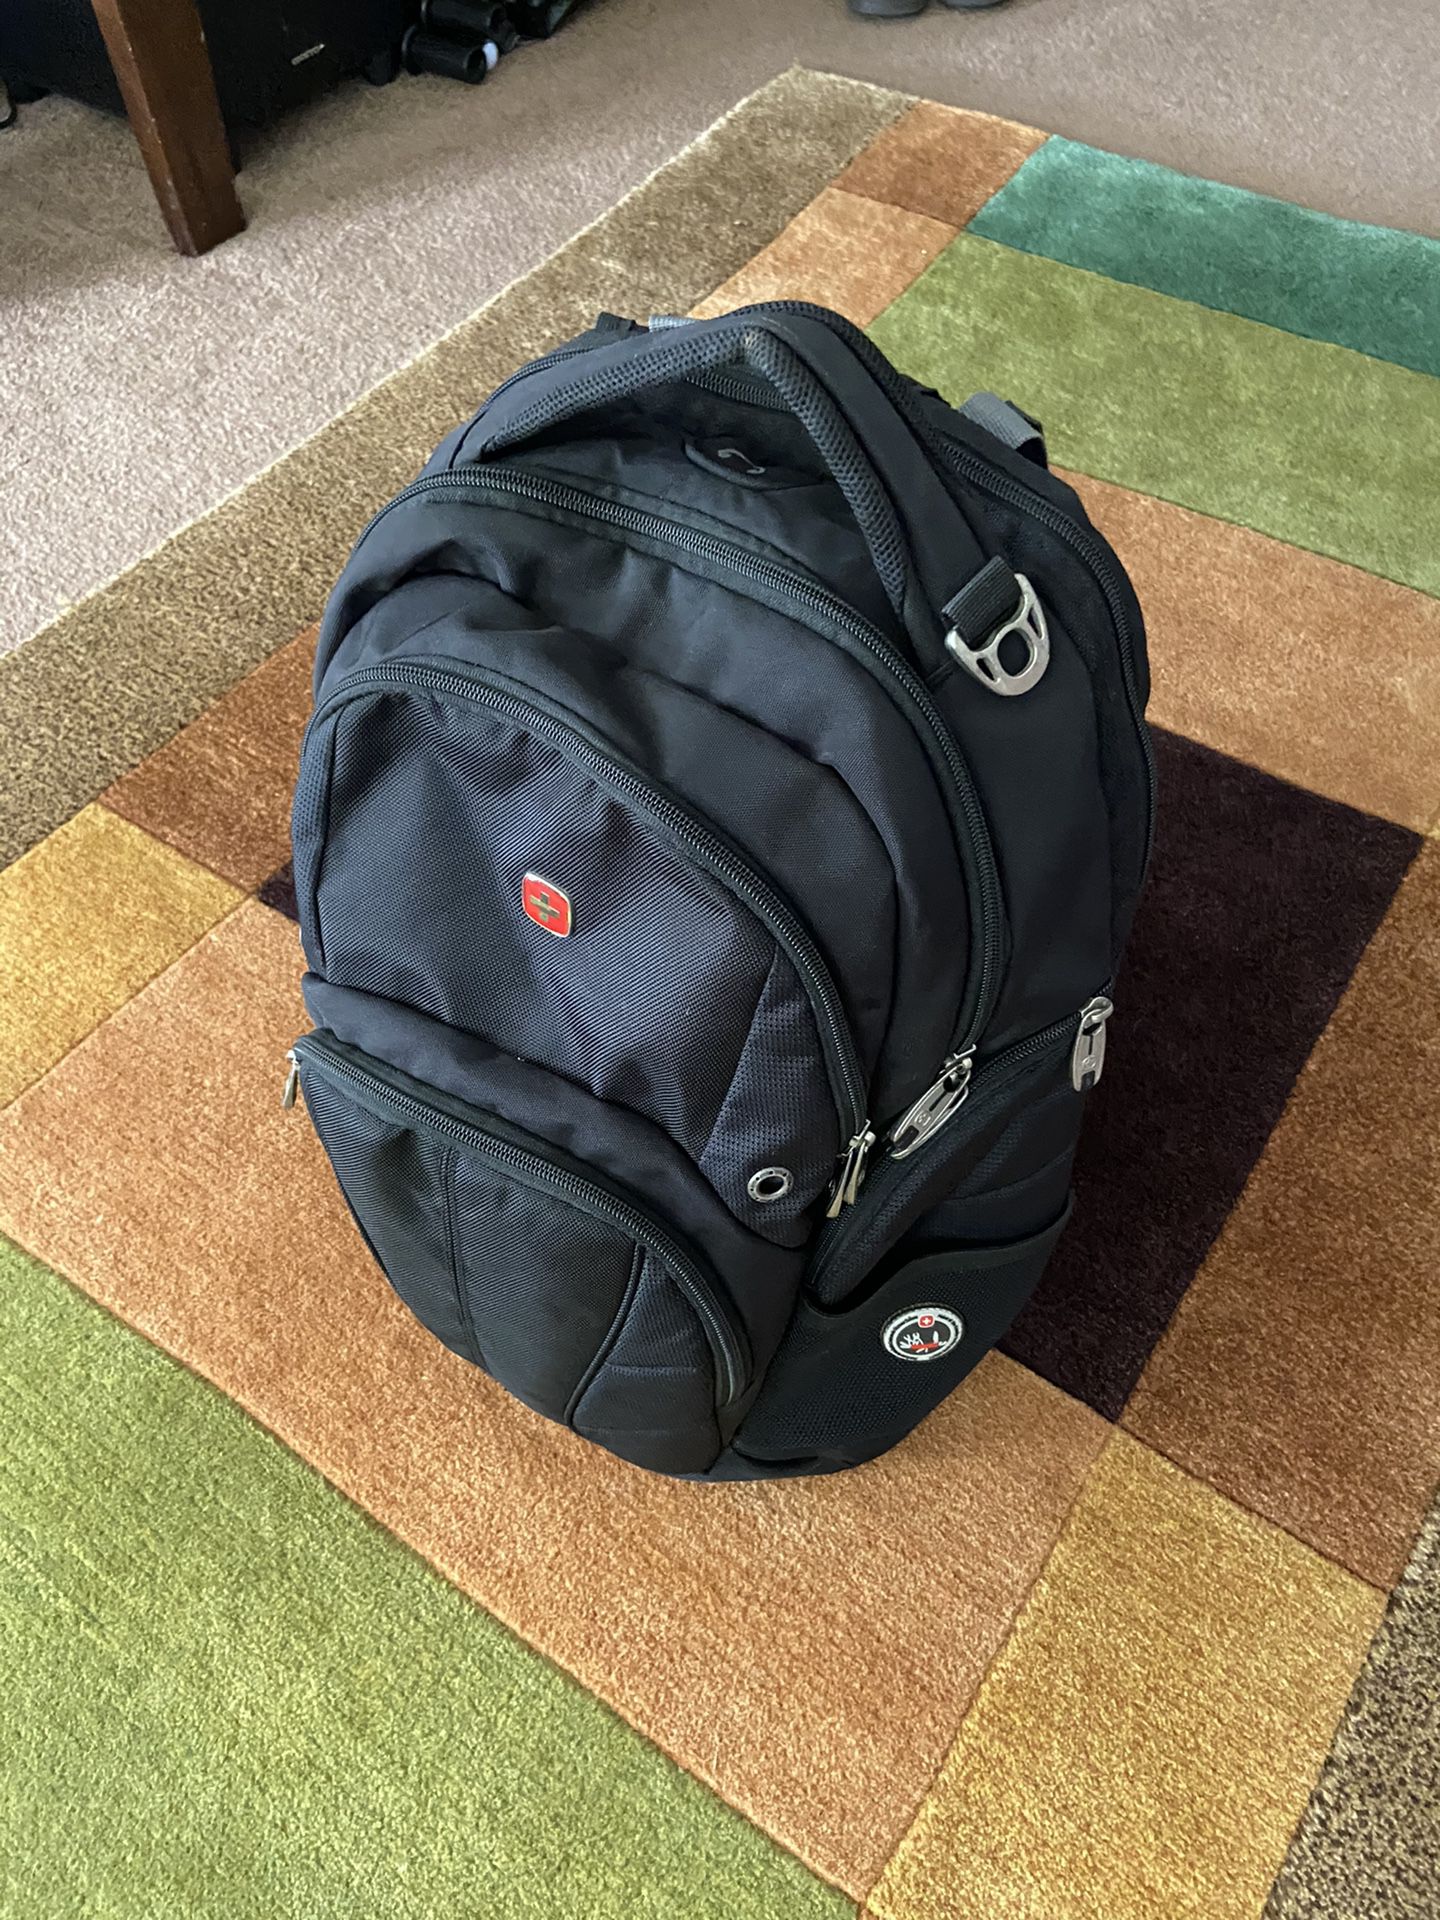 Swiss Gear Backpack Travel Hiking. Black. Airflow Multi Layers. Used